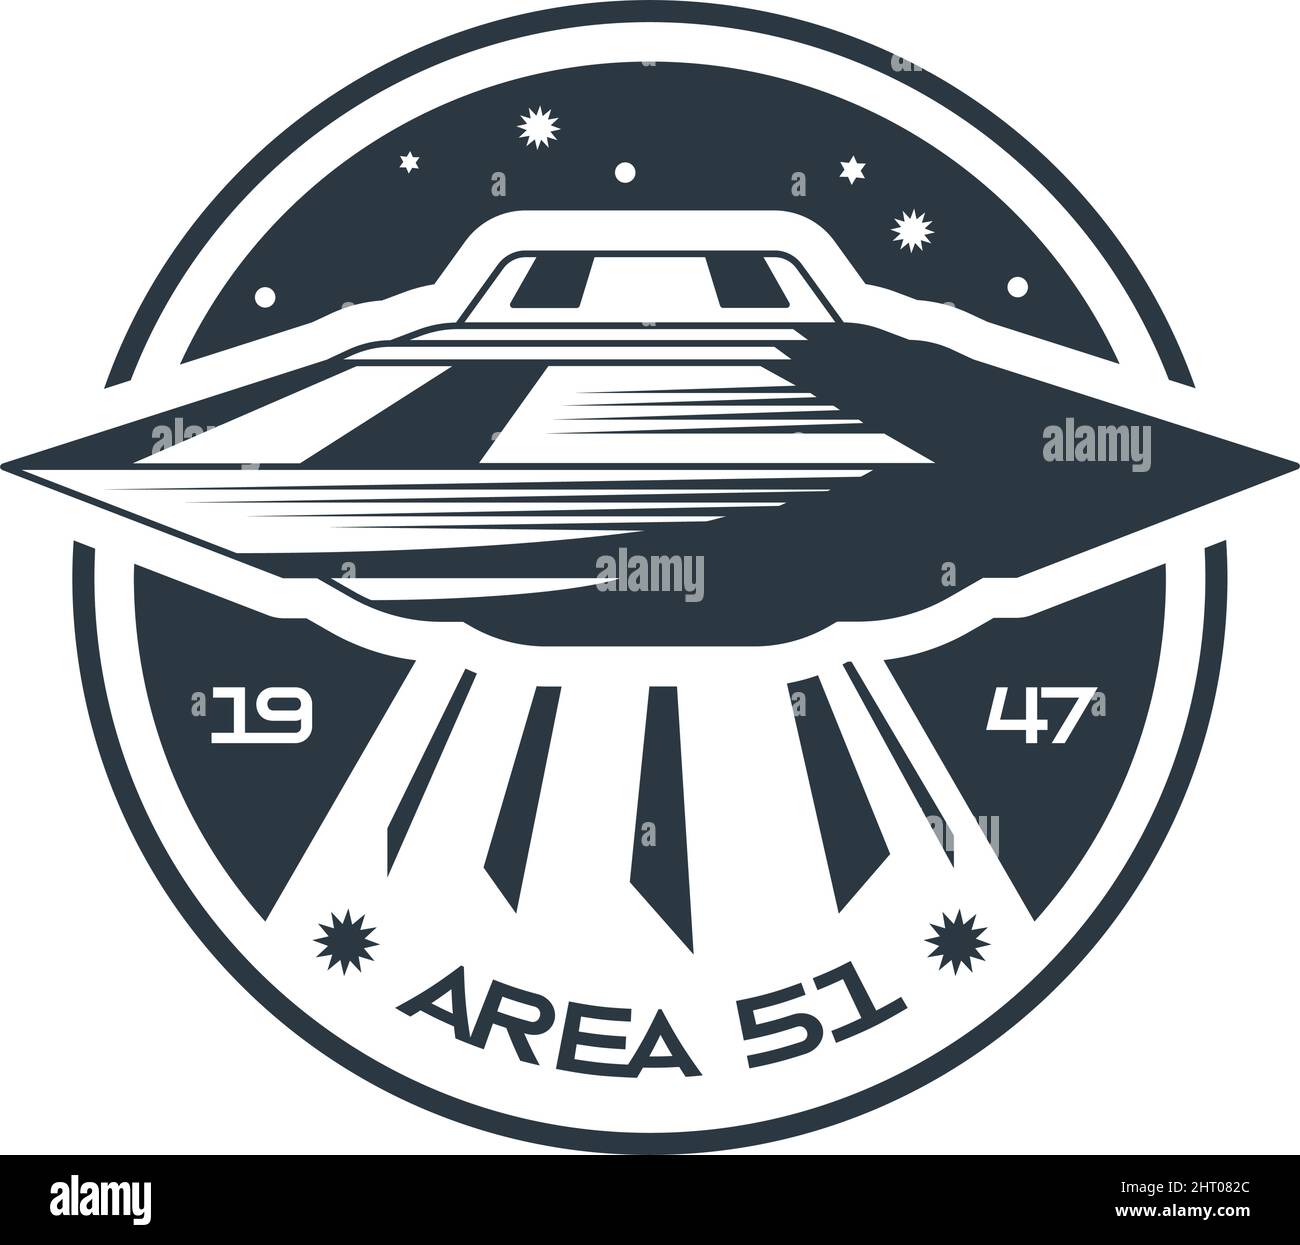 Space emblem monochrome composition with text area 51 and starry sky with flying ufo vector illustration Stock Vector